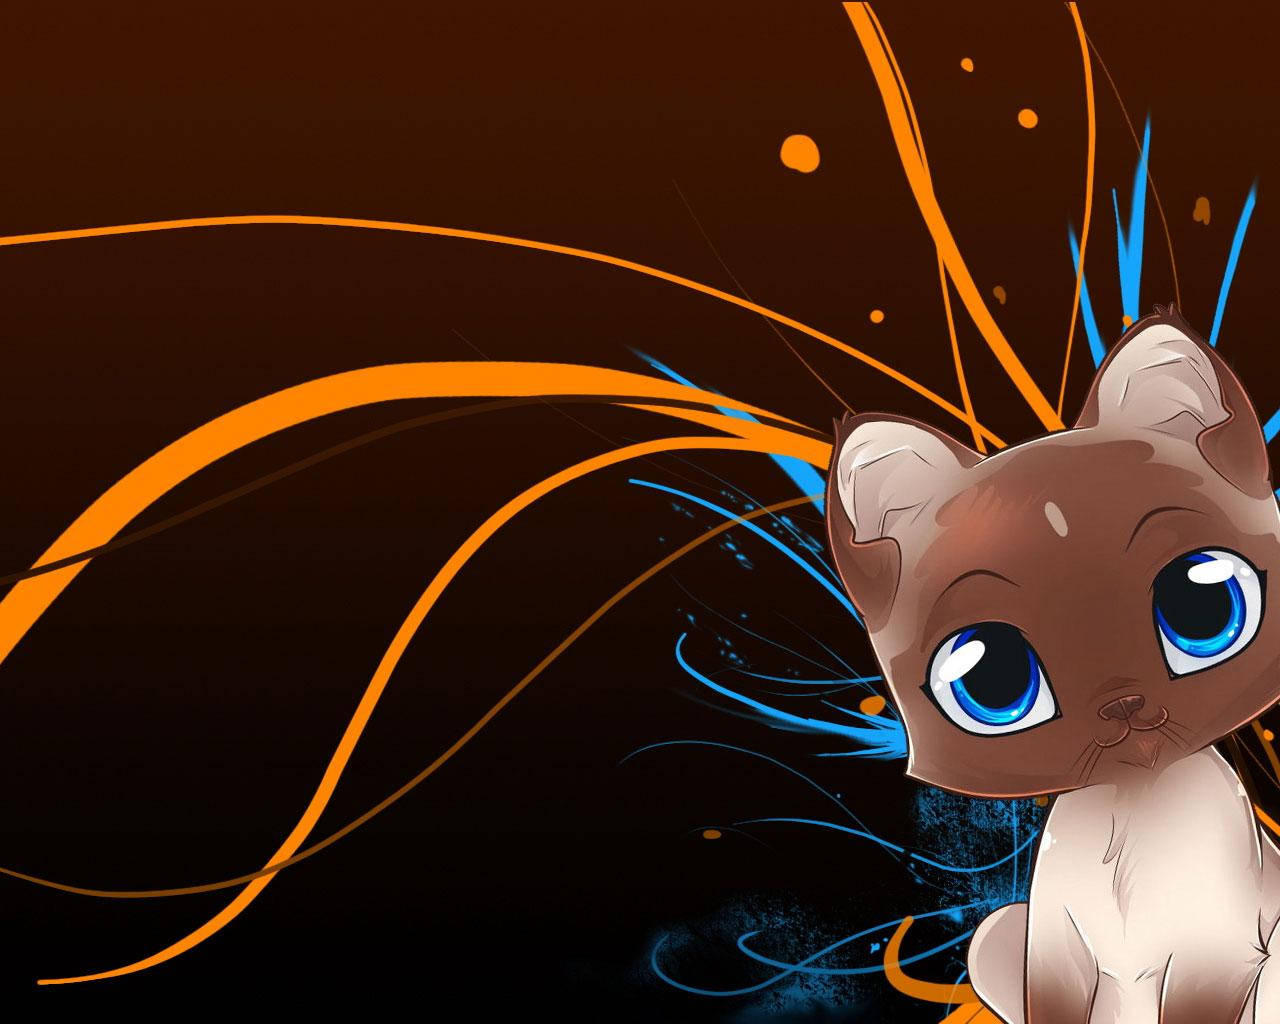 Kawaii Siamese Cat With Orange And Blue Lines